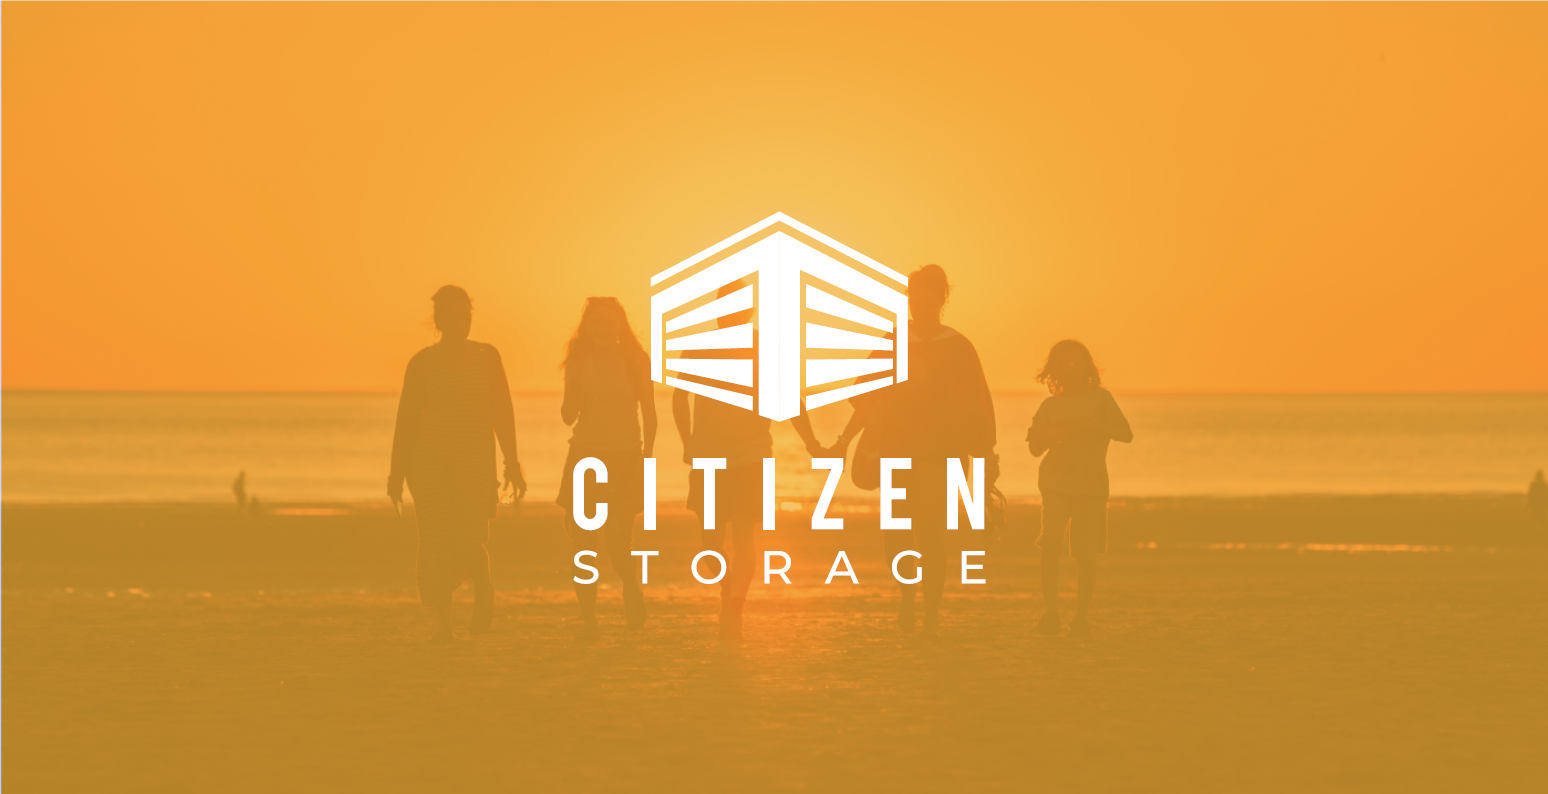 Citizen Storage Management Expands into New Jersey and Pennsylvania with  Two New Property Takeovers